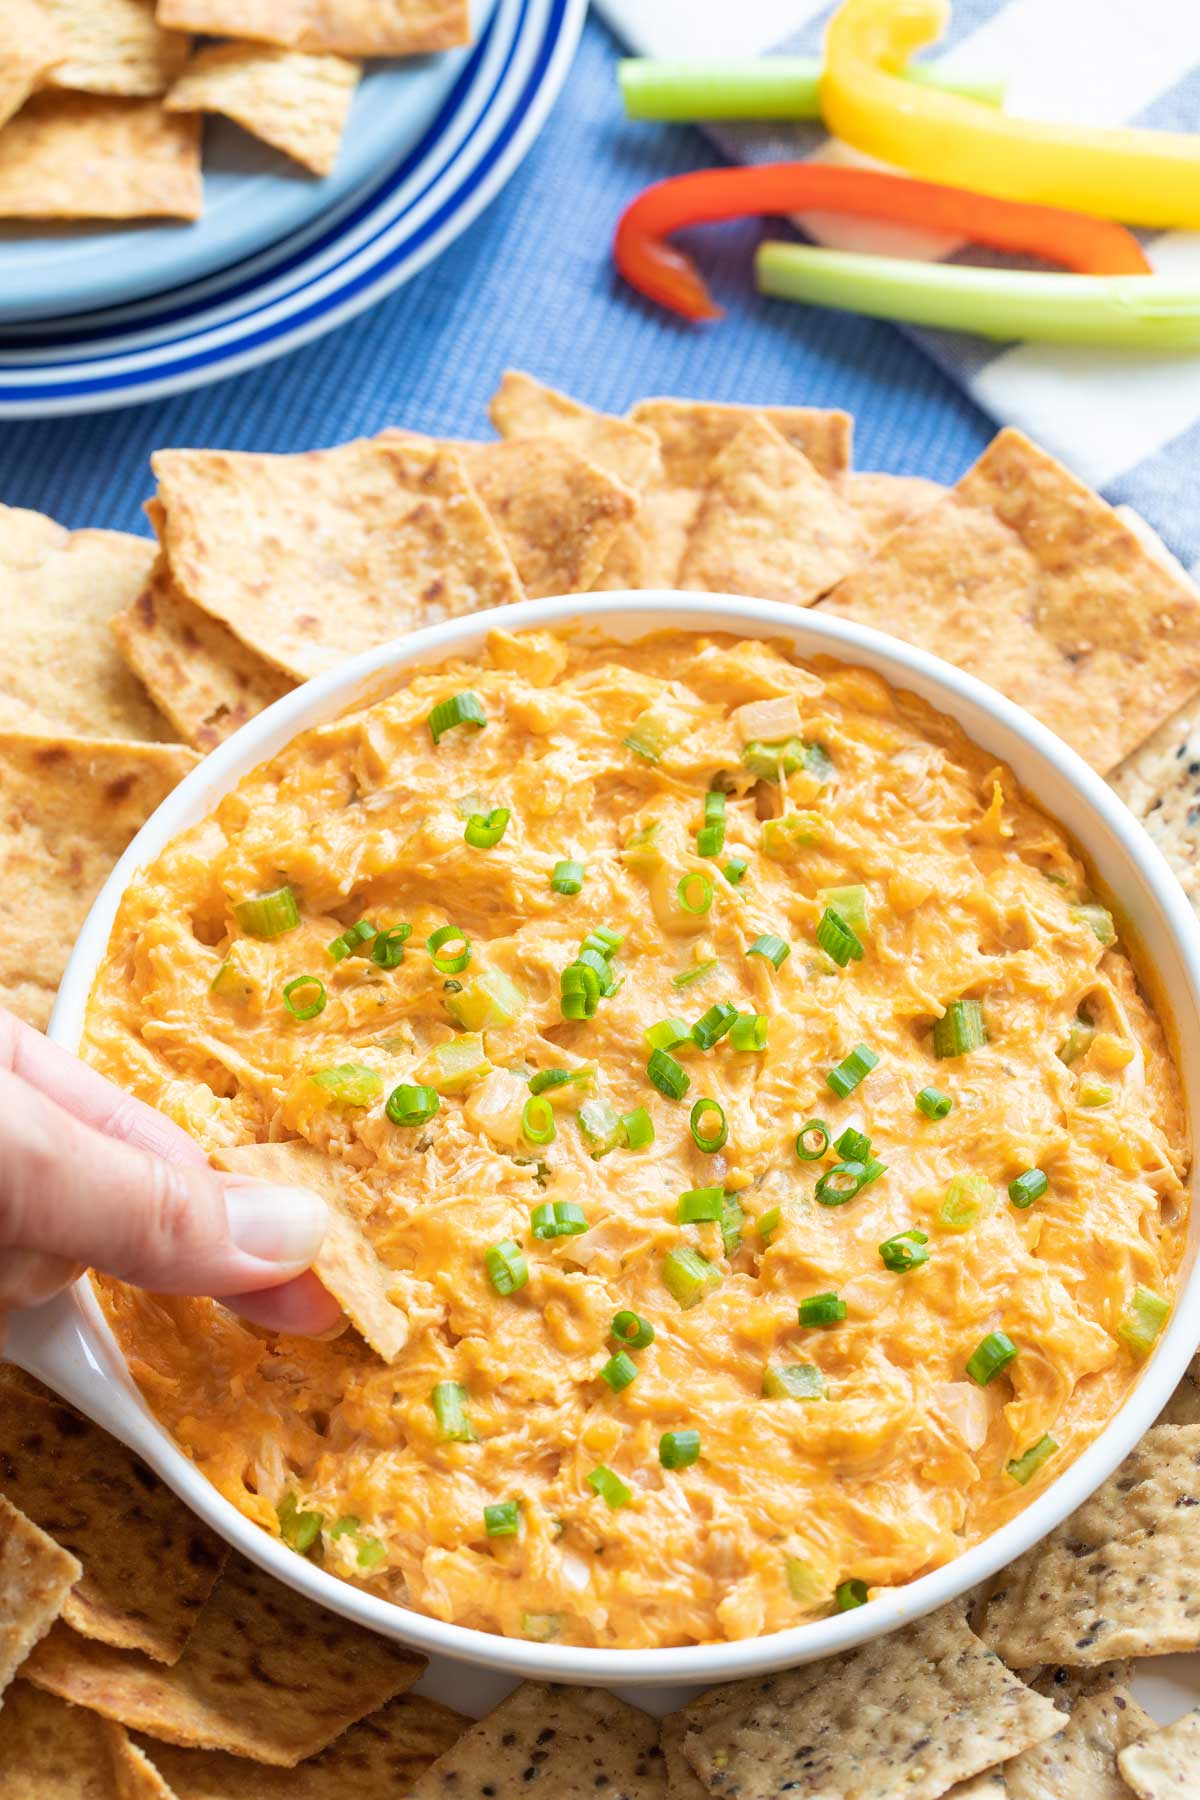 Fingers dunking a chip into the bowl of Healthy Buffalo Chicken Dip, with other chips arranged all around and vegetable stick dippers in background.